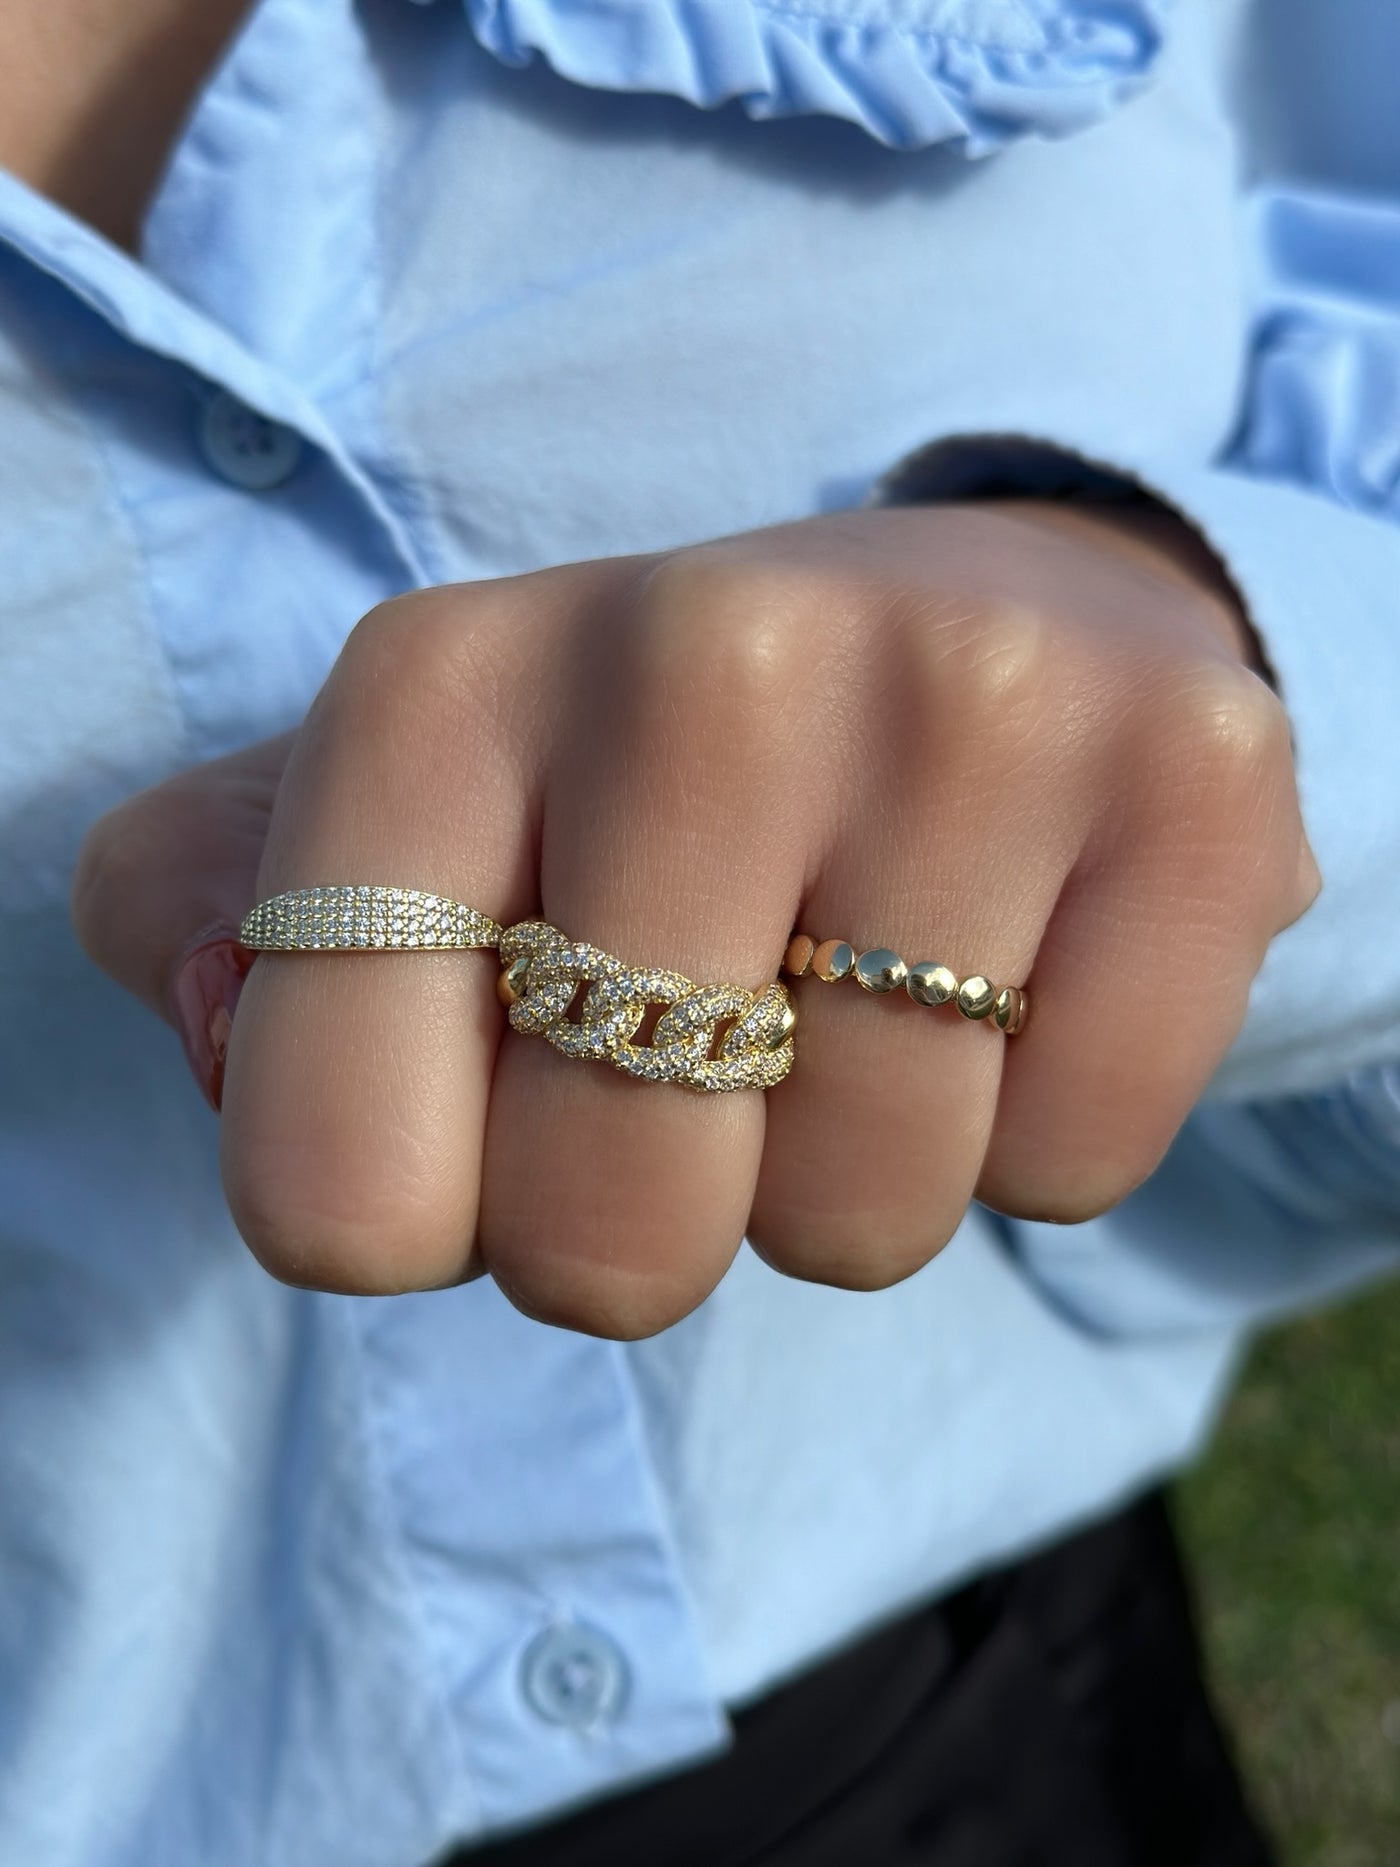 Pave Chain Ring